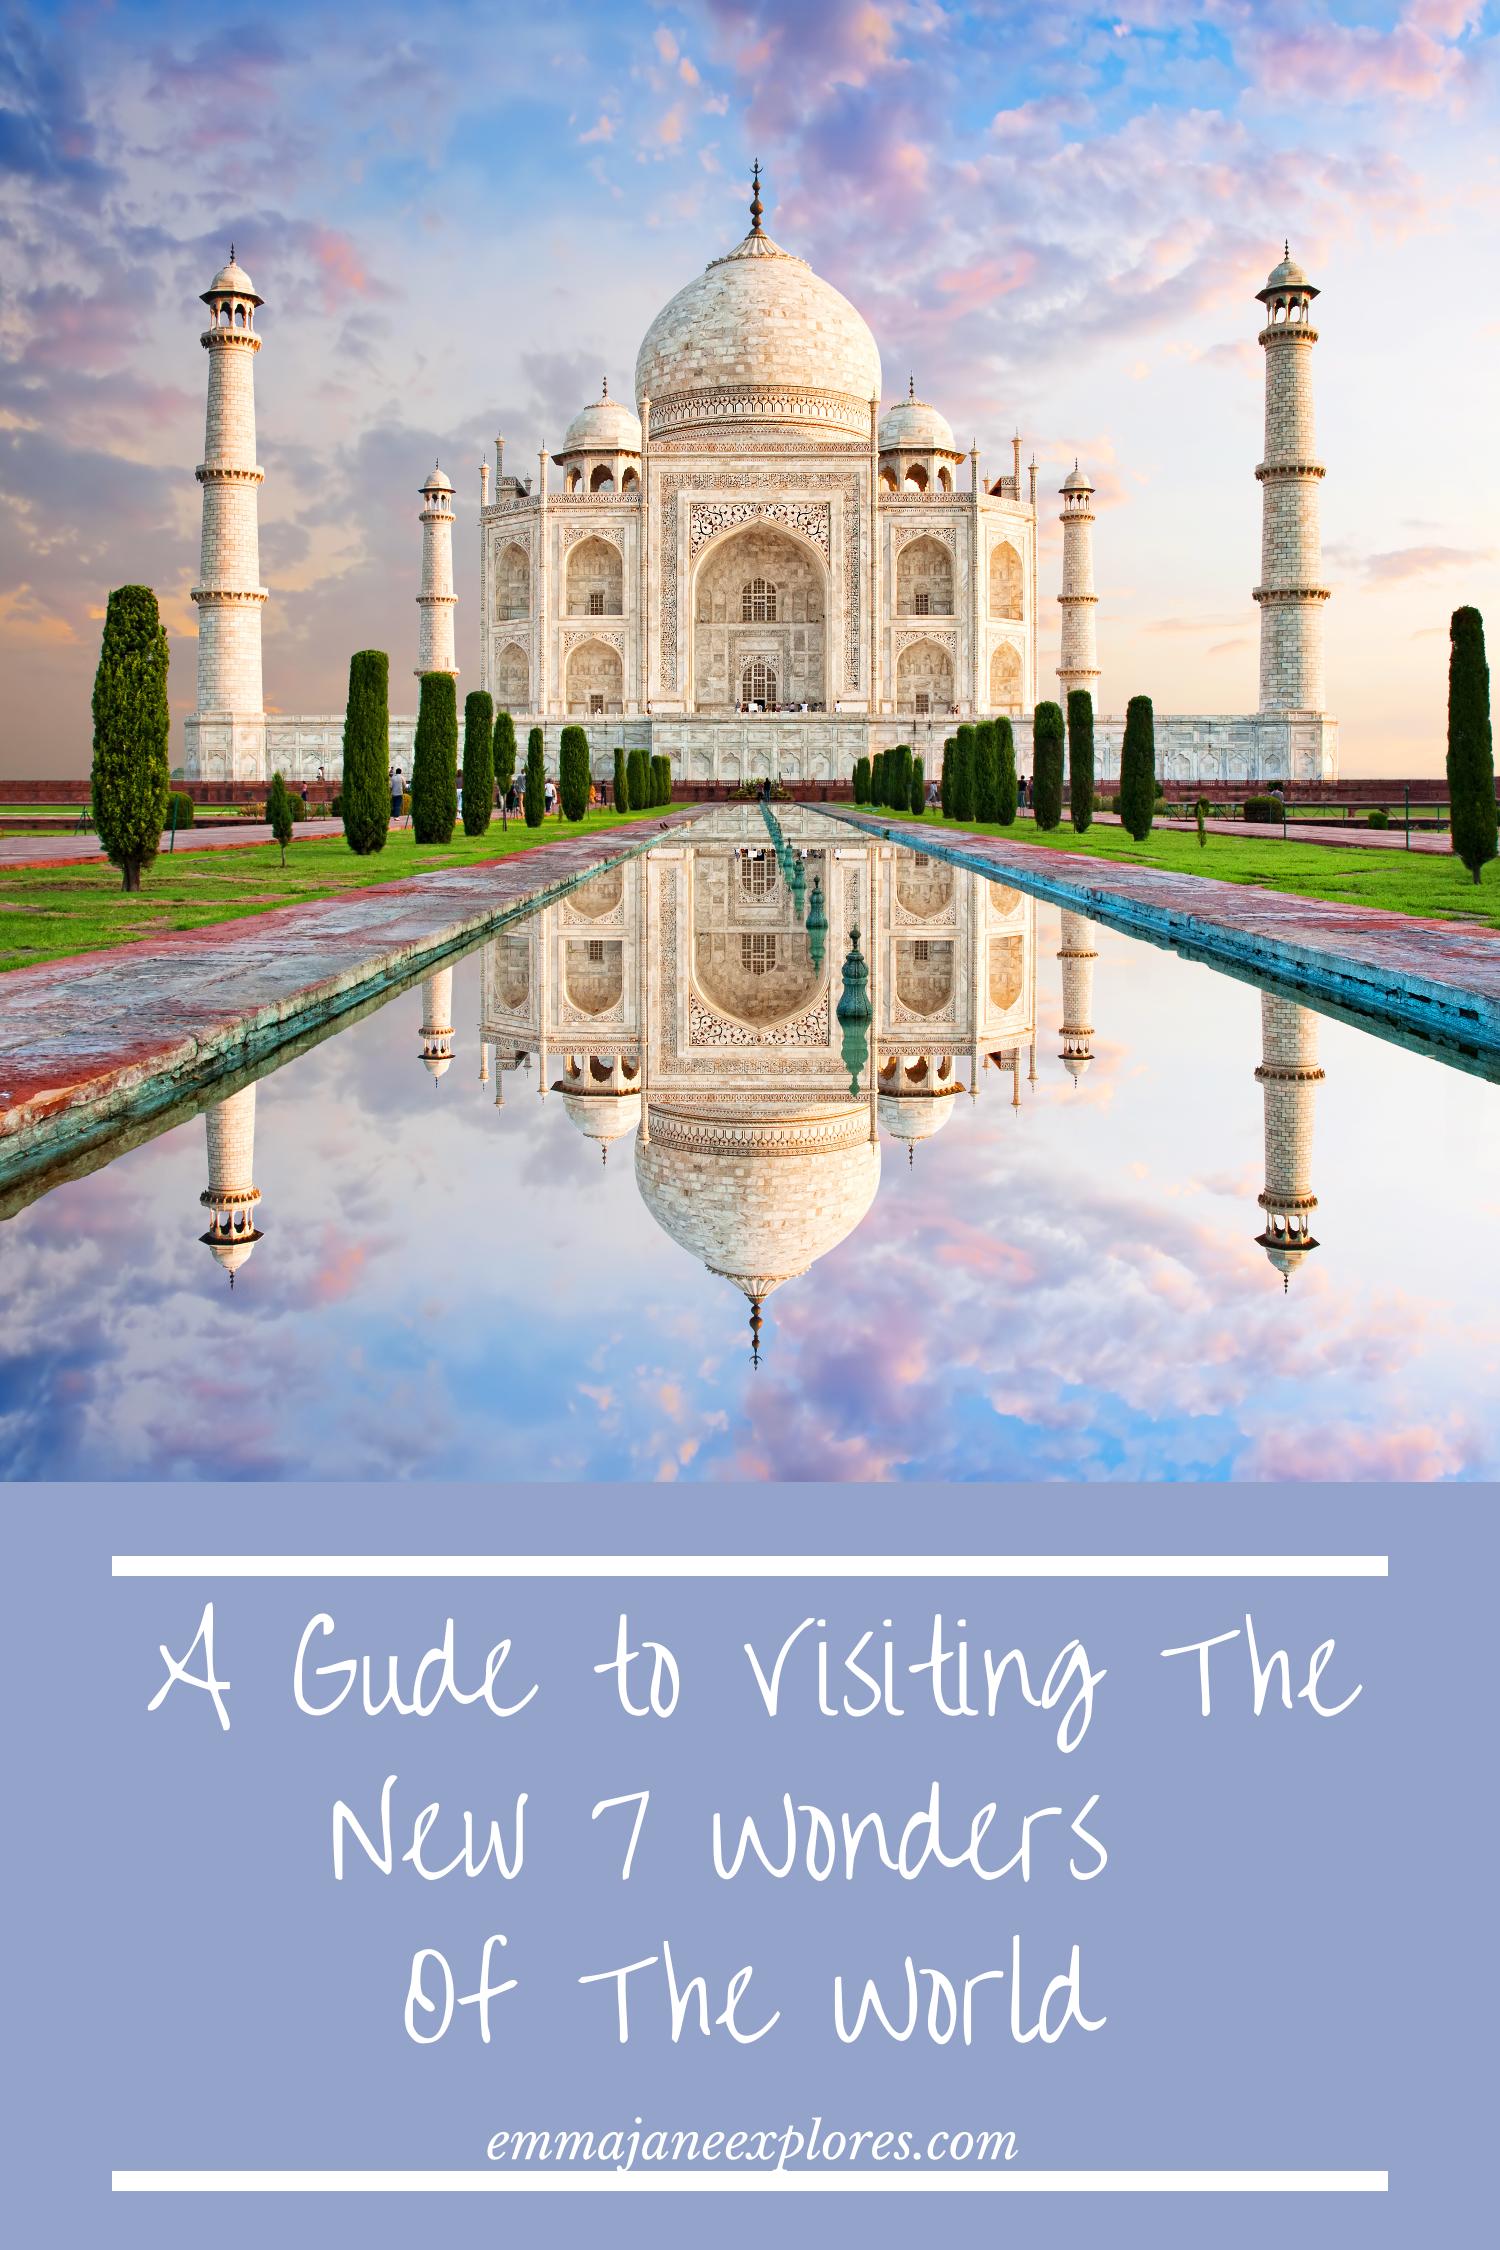 Travel To The New Seven Wonders of the World - Emma Jane Explores